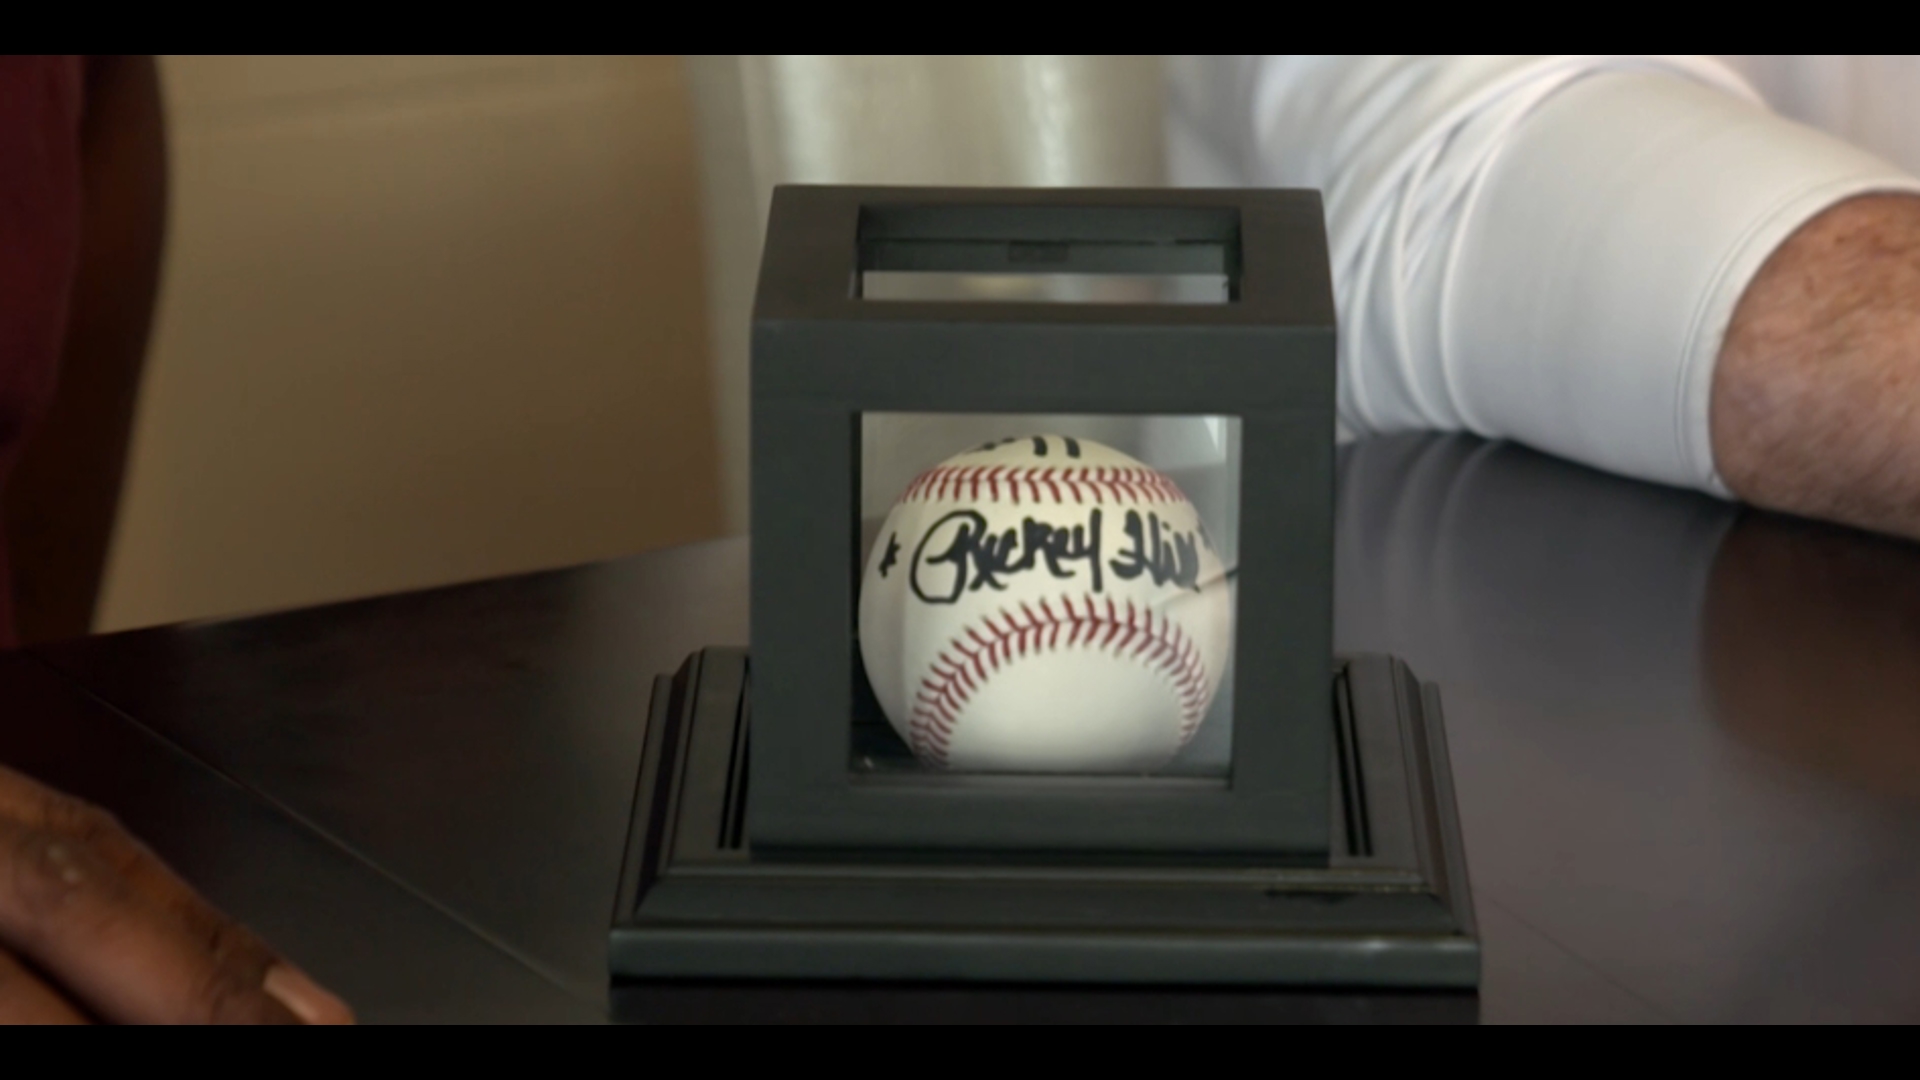 Rickey Hill's short lived baseball career was depicted in an award winning movie.